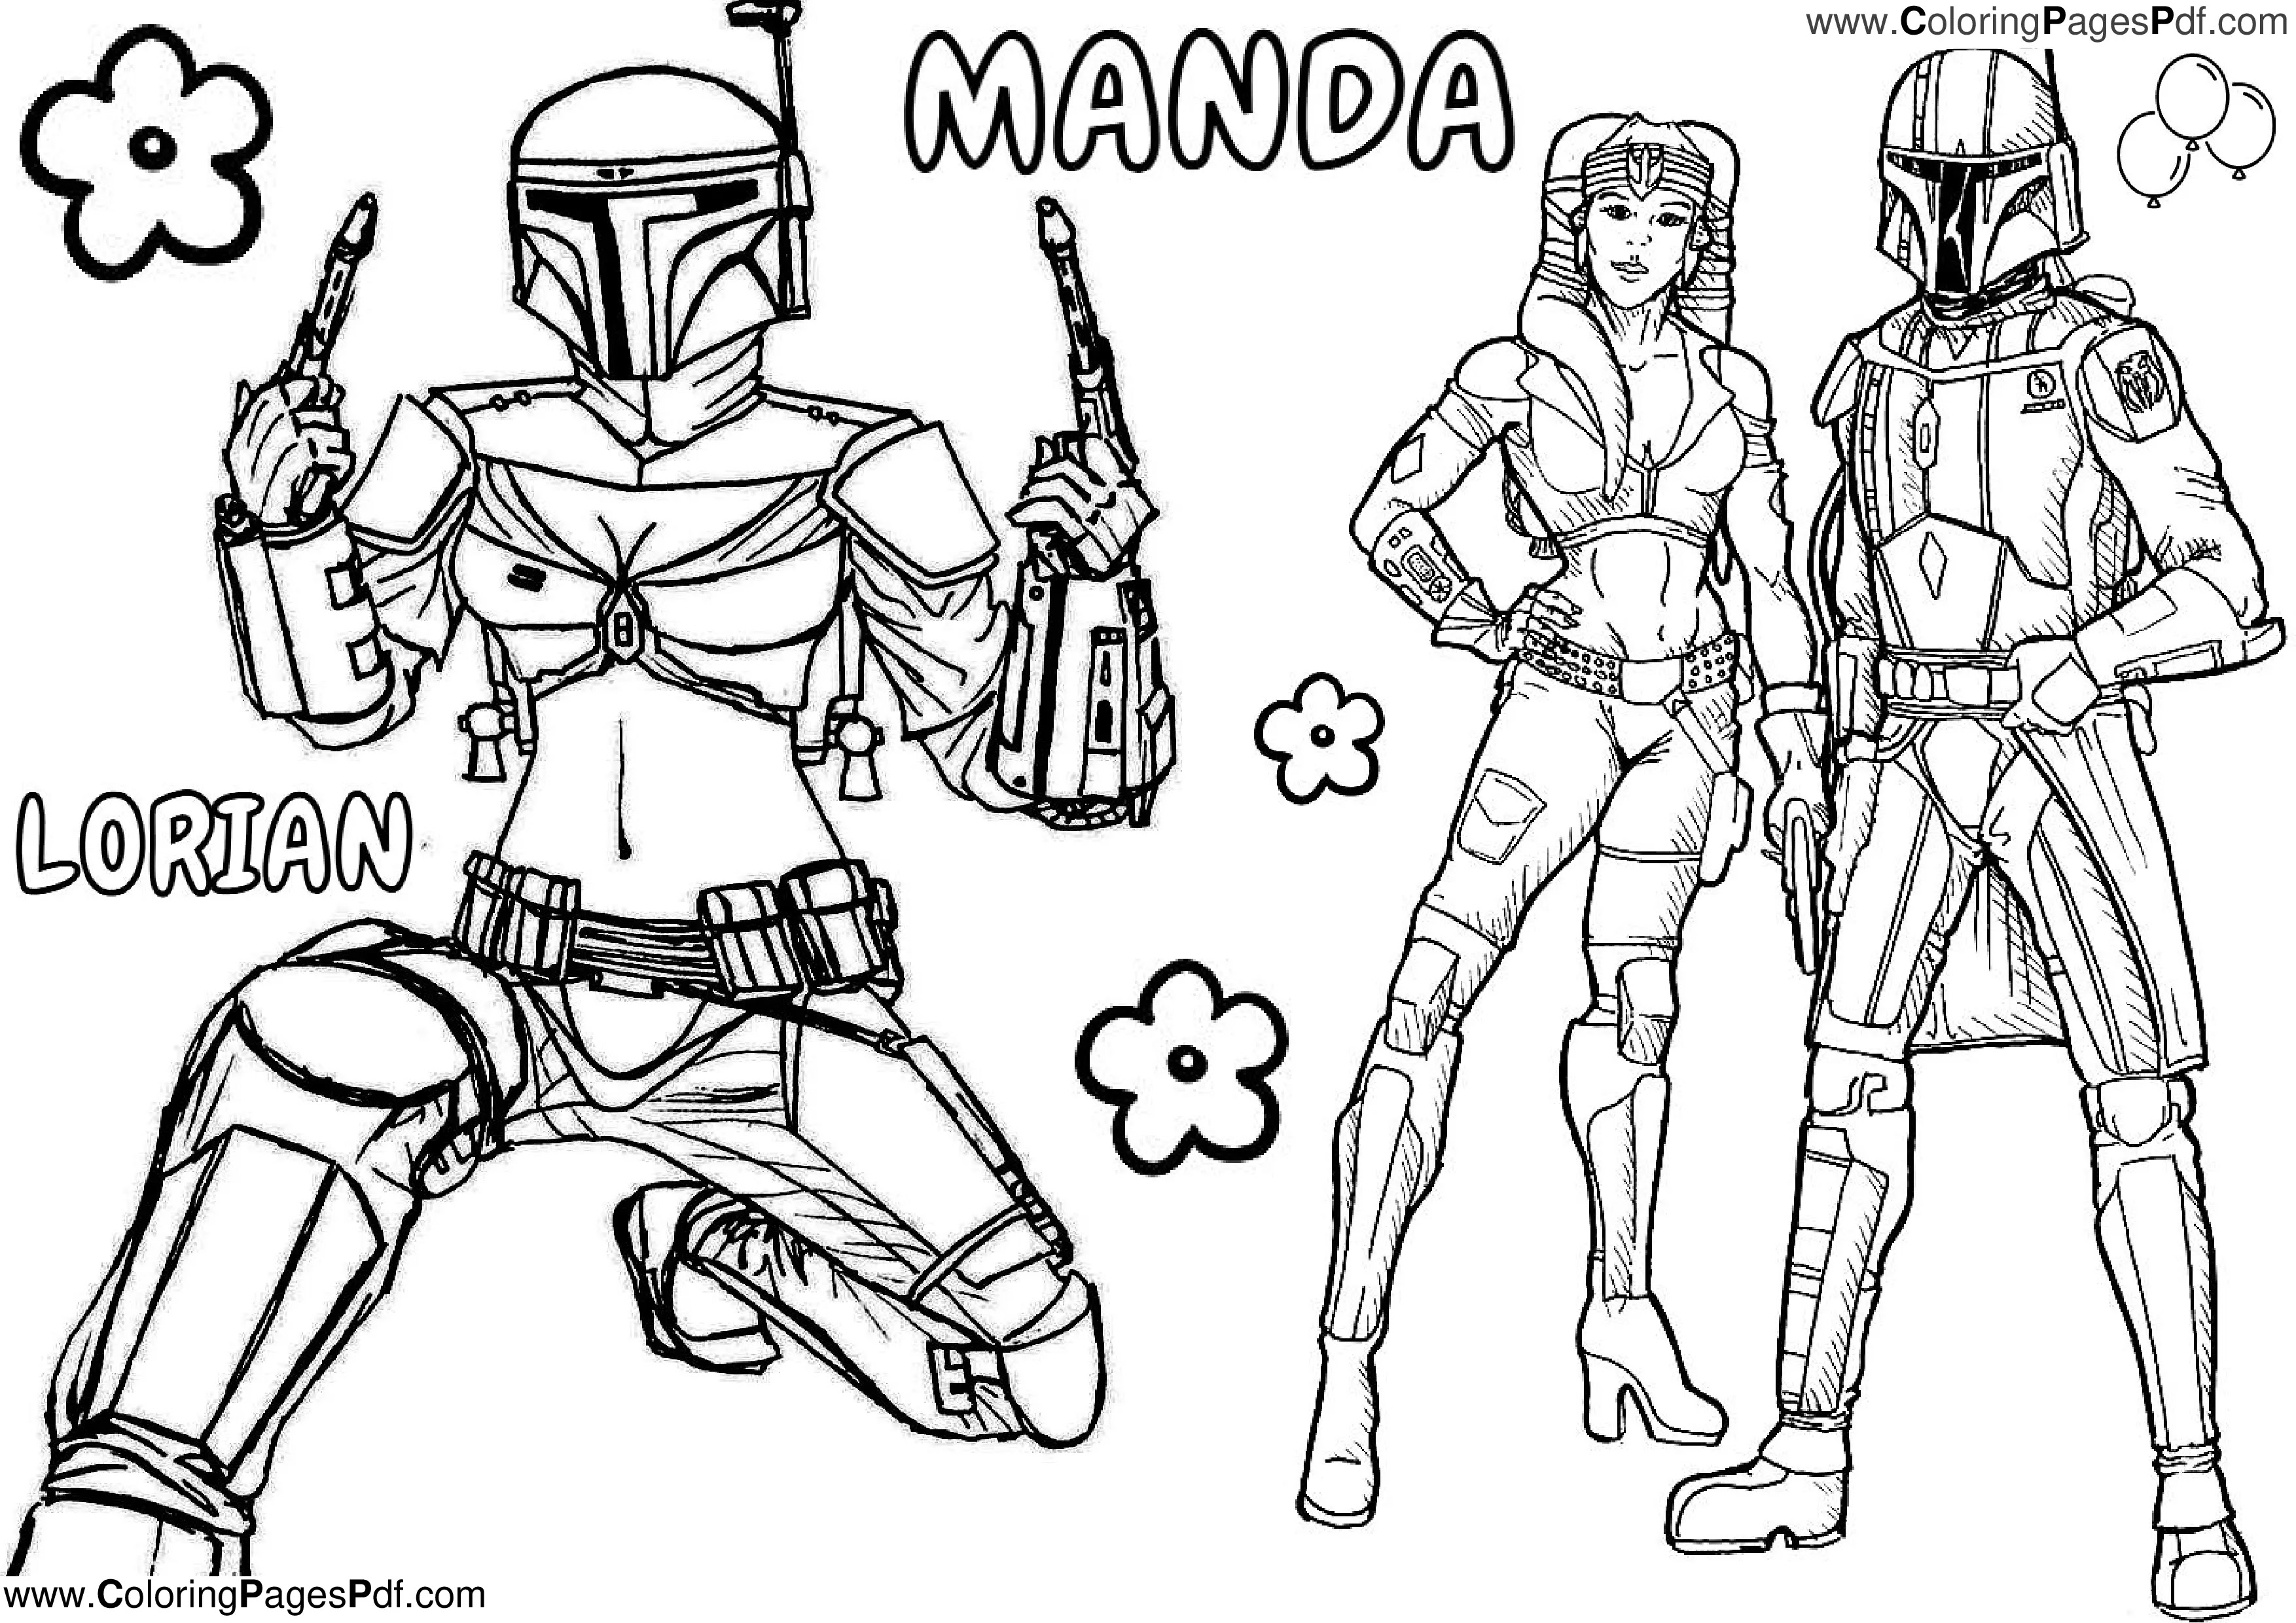 Mandalorian coloring pages for girls